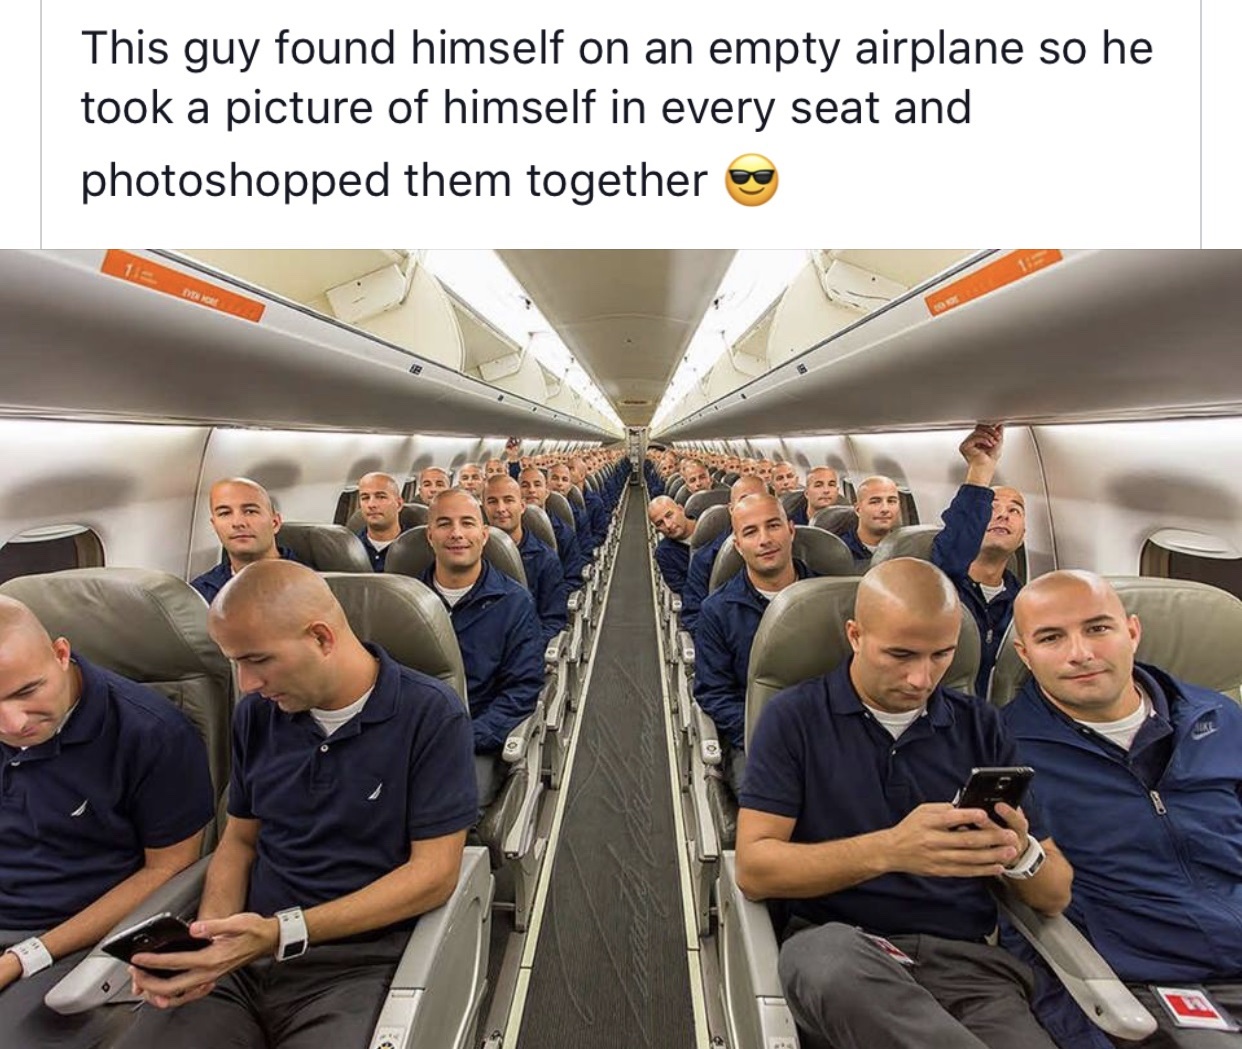 guy takes picture in every plane seat - This guy found himself on an empty airplane so he took a picture of himself in every seat and photoshopped them together De More